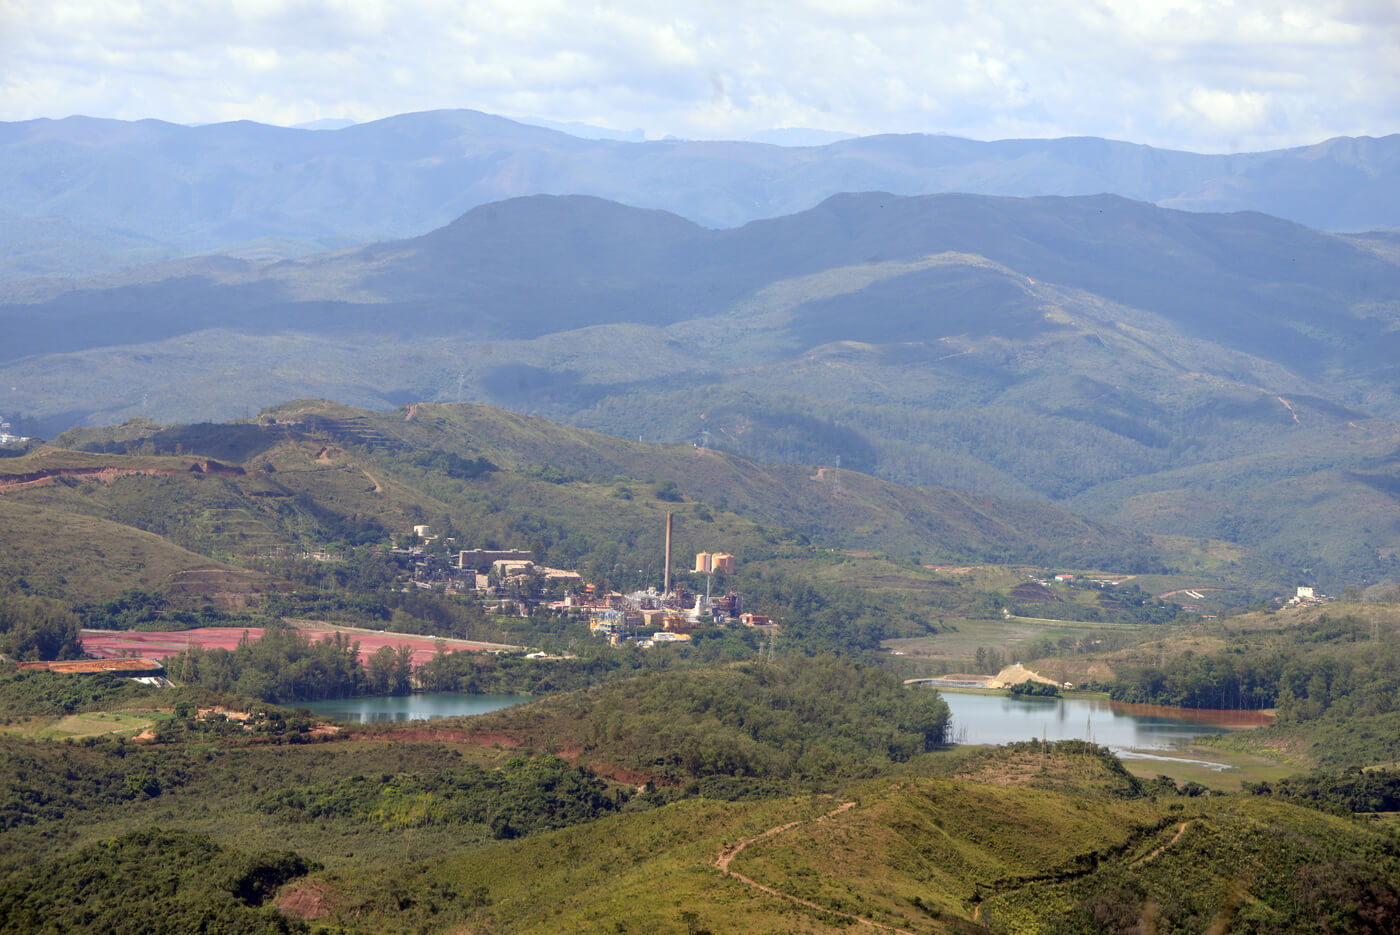 The photo shows the extension of Serra do Curral, a local forest protected area in Minas Gerais